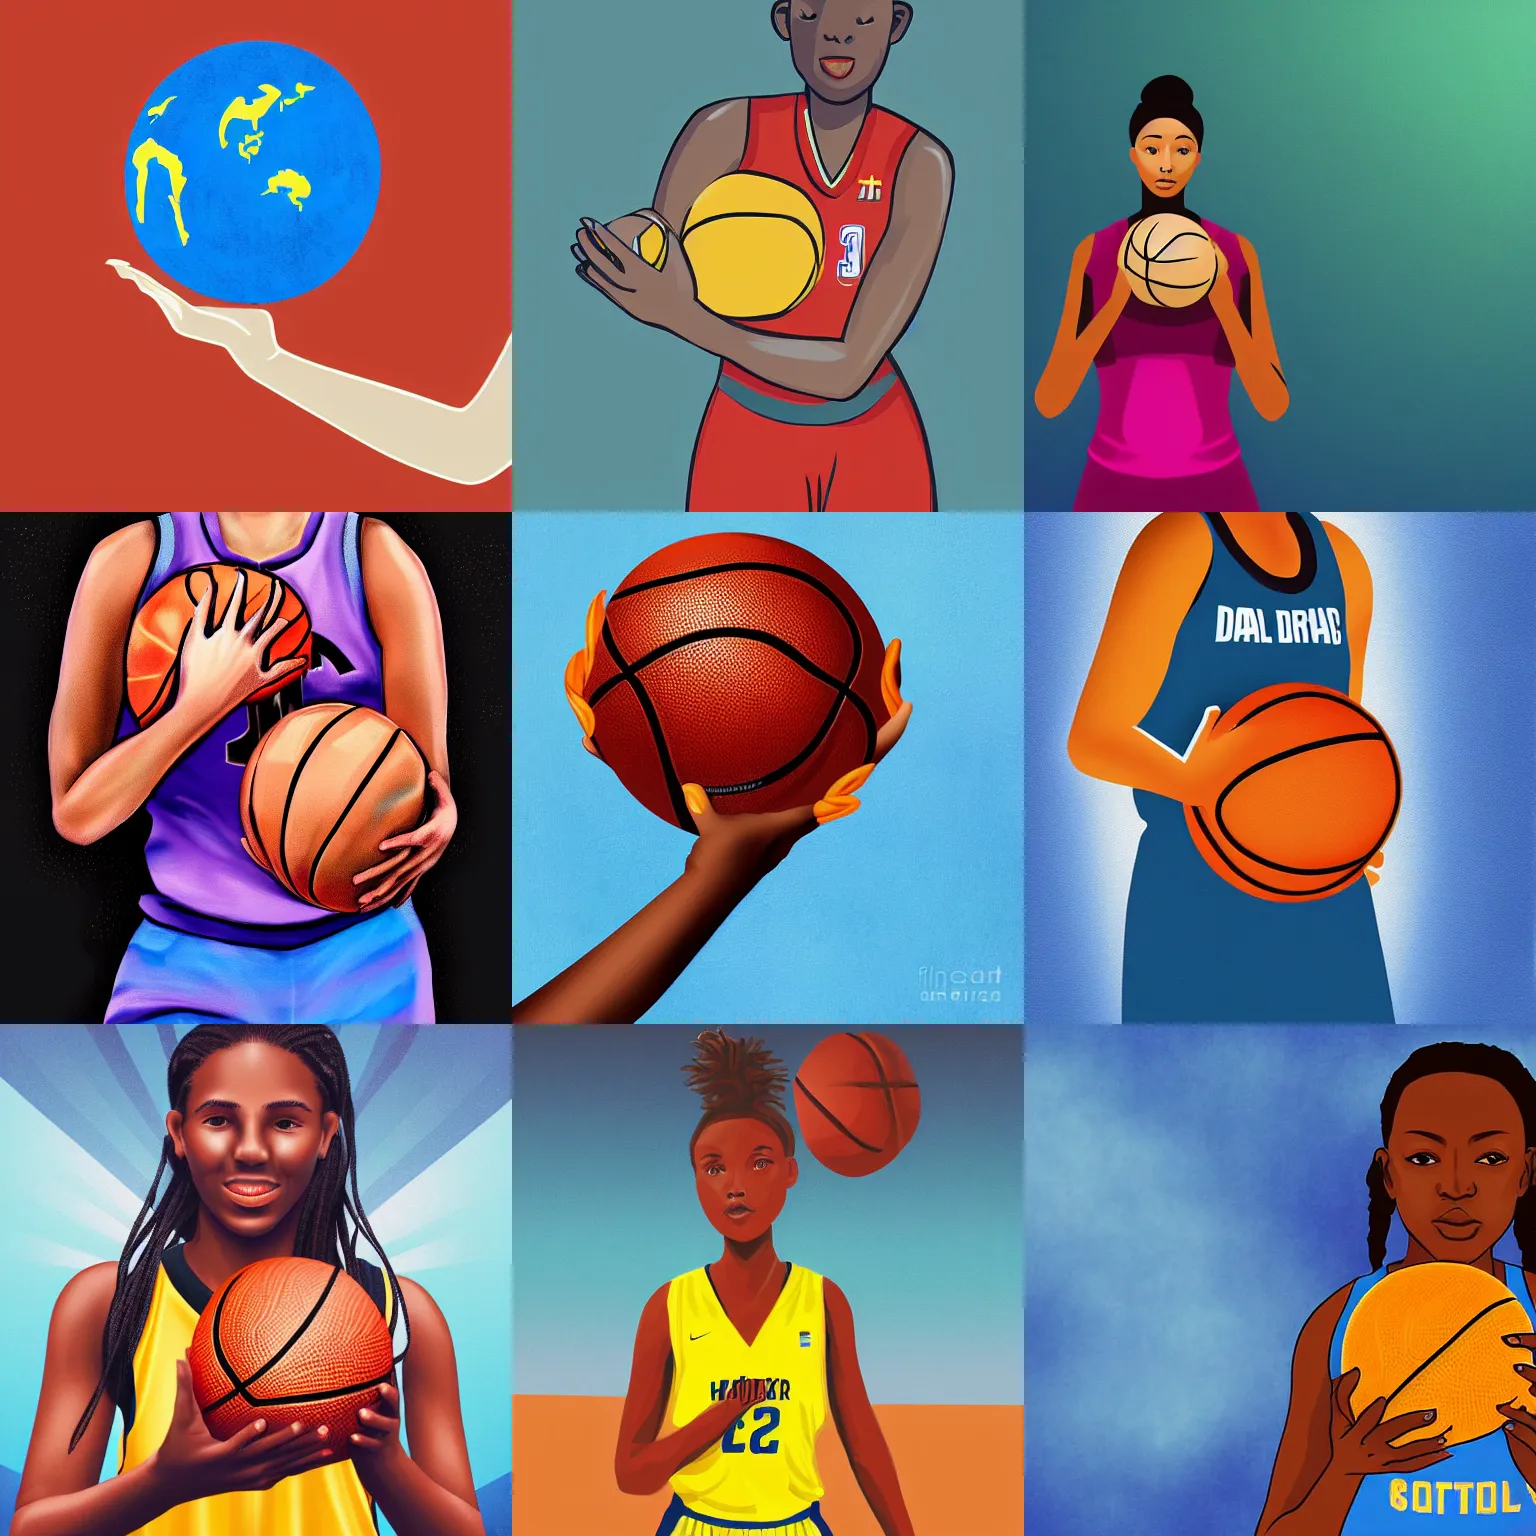 Prompt: A basketball player holding a ball Earth in her hand, digital art